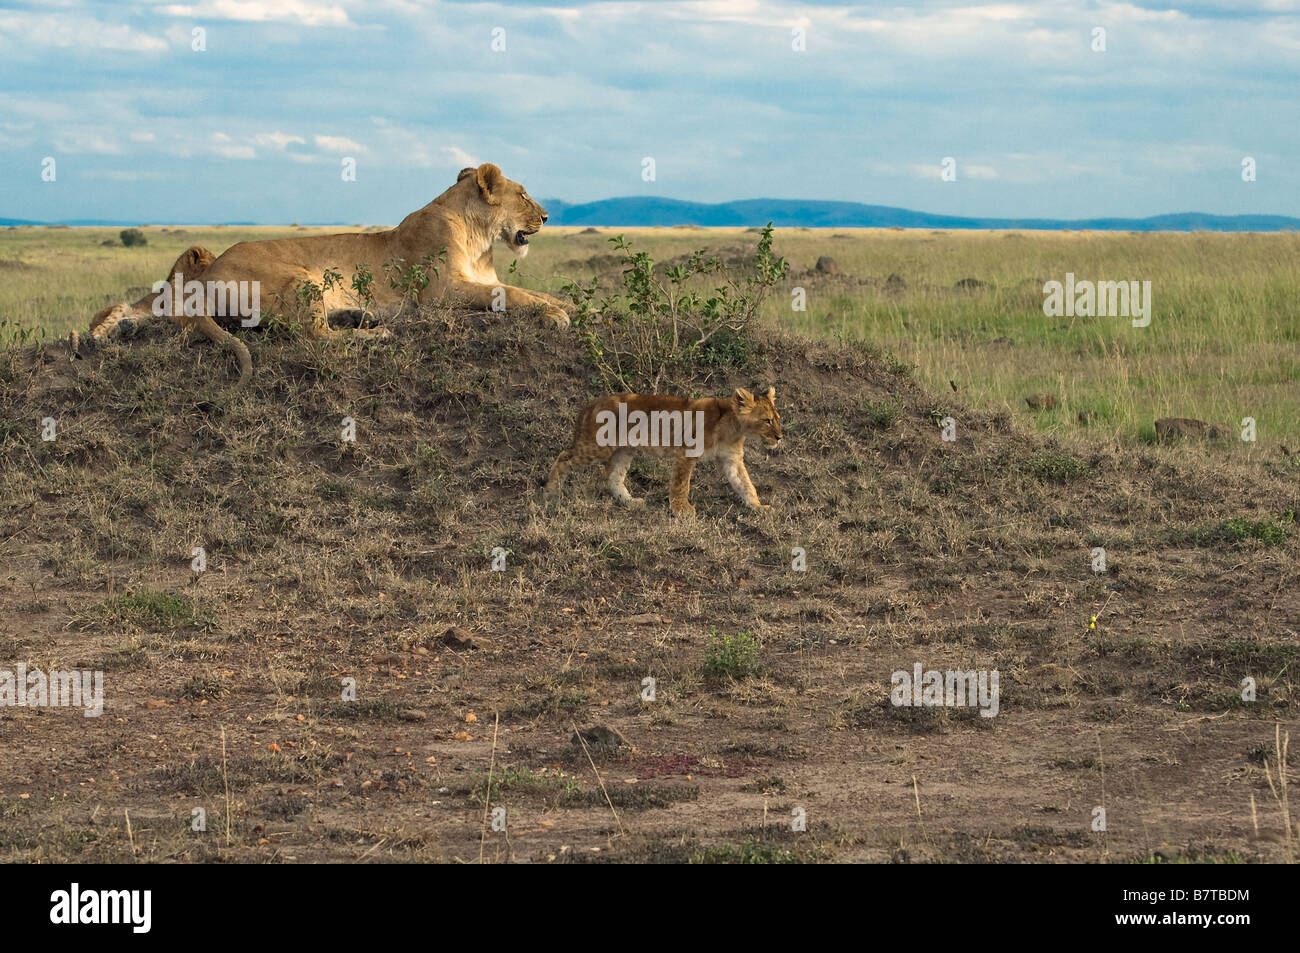 African lioness with her young cubs Stock Photo